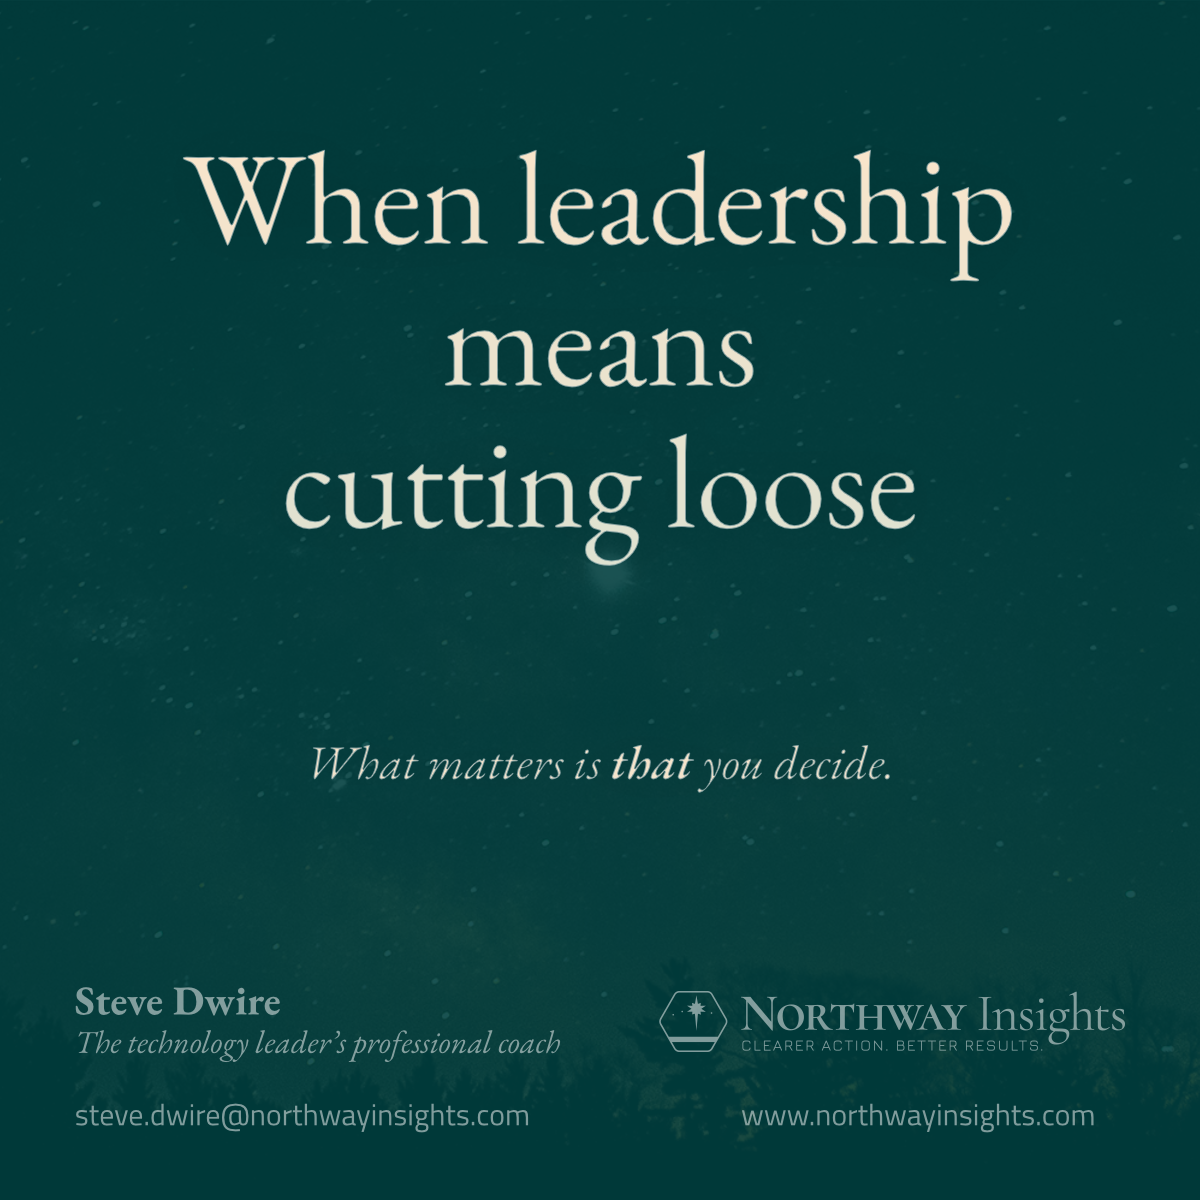 When leadership means cutting loose